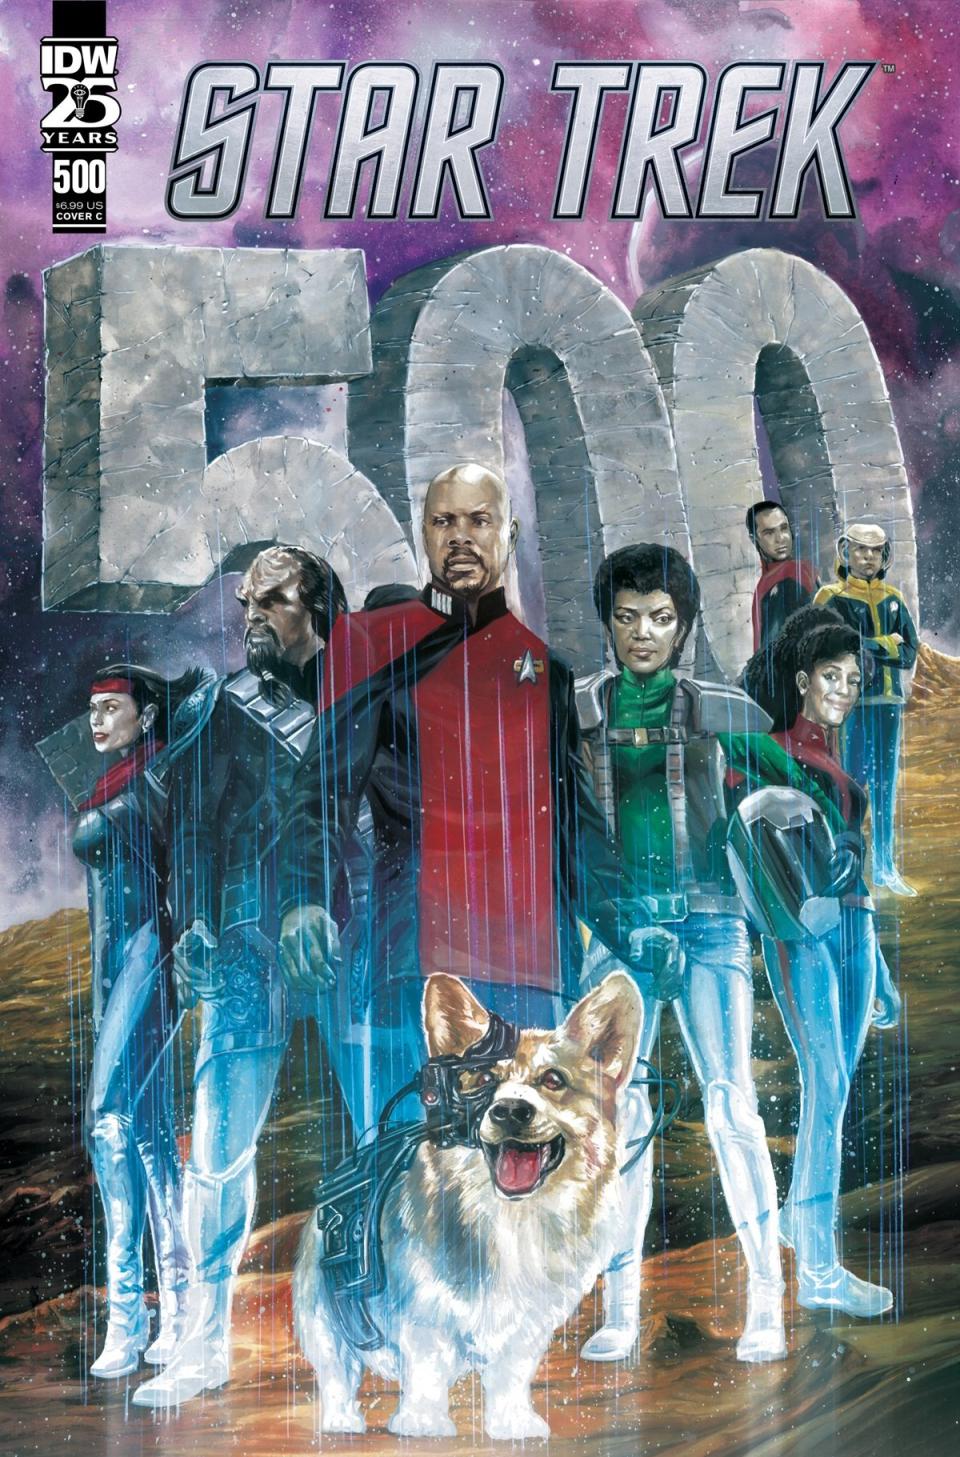 Star Trek #500, Cover C, illustrated by JK Woodward.